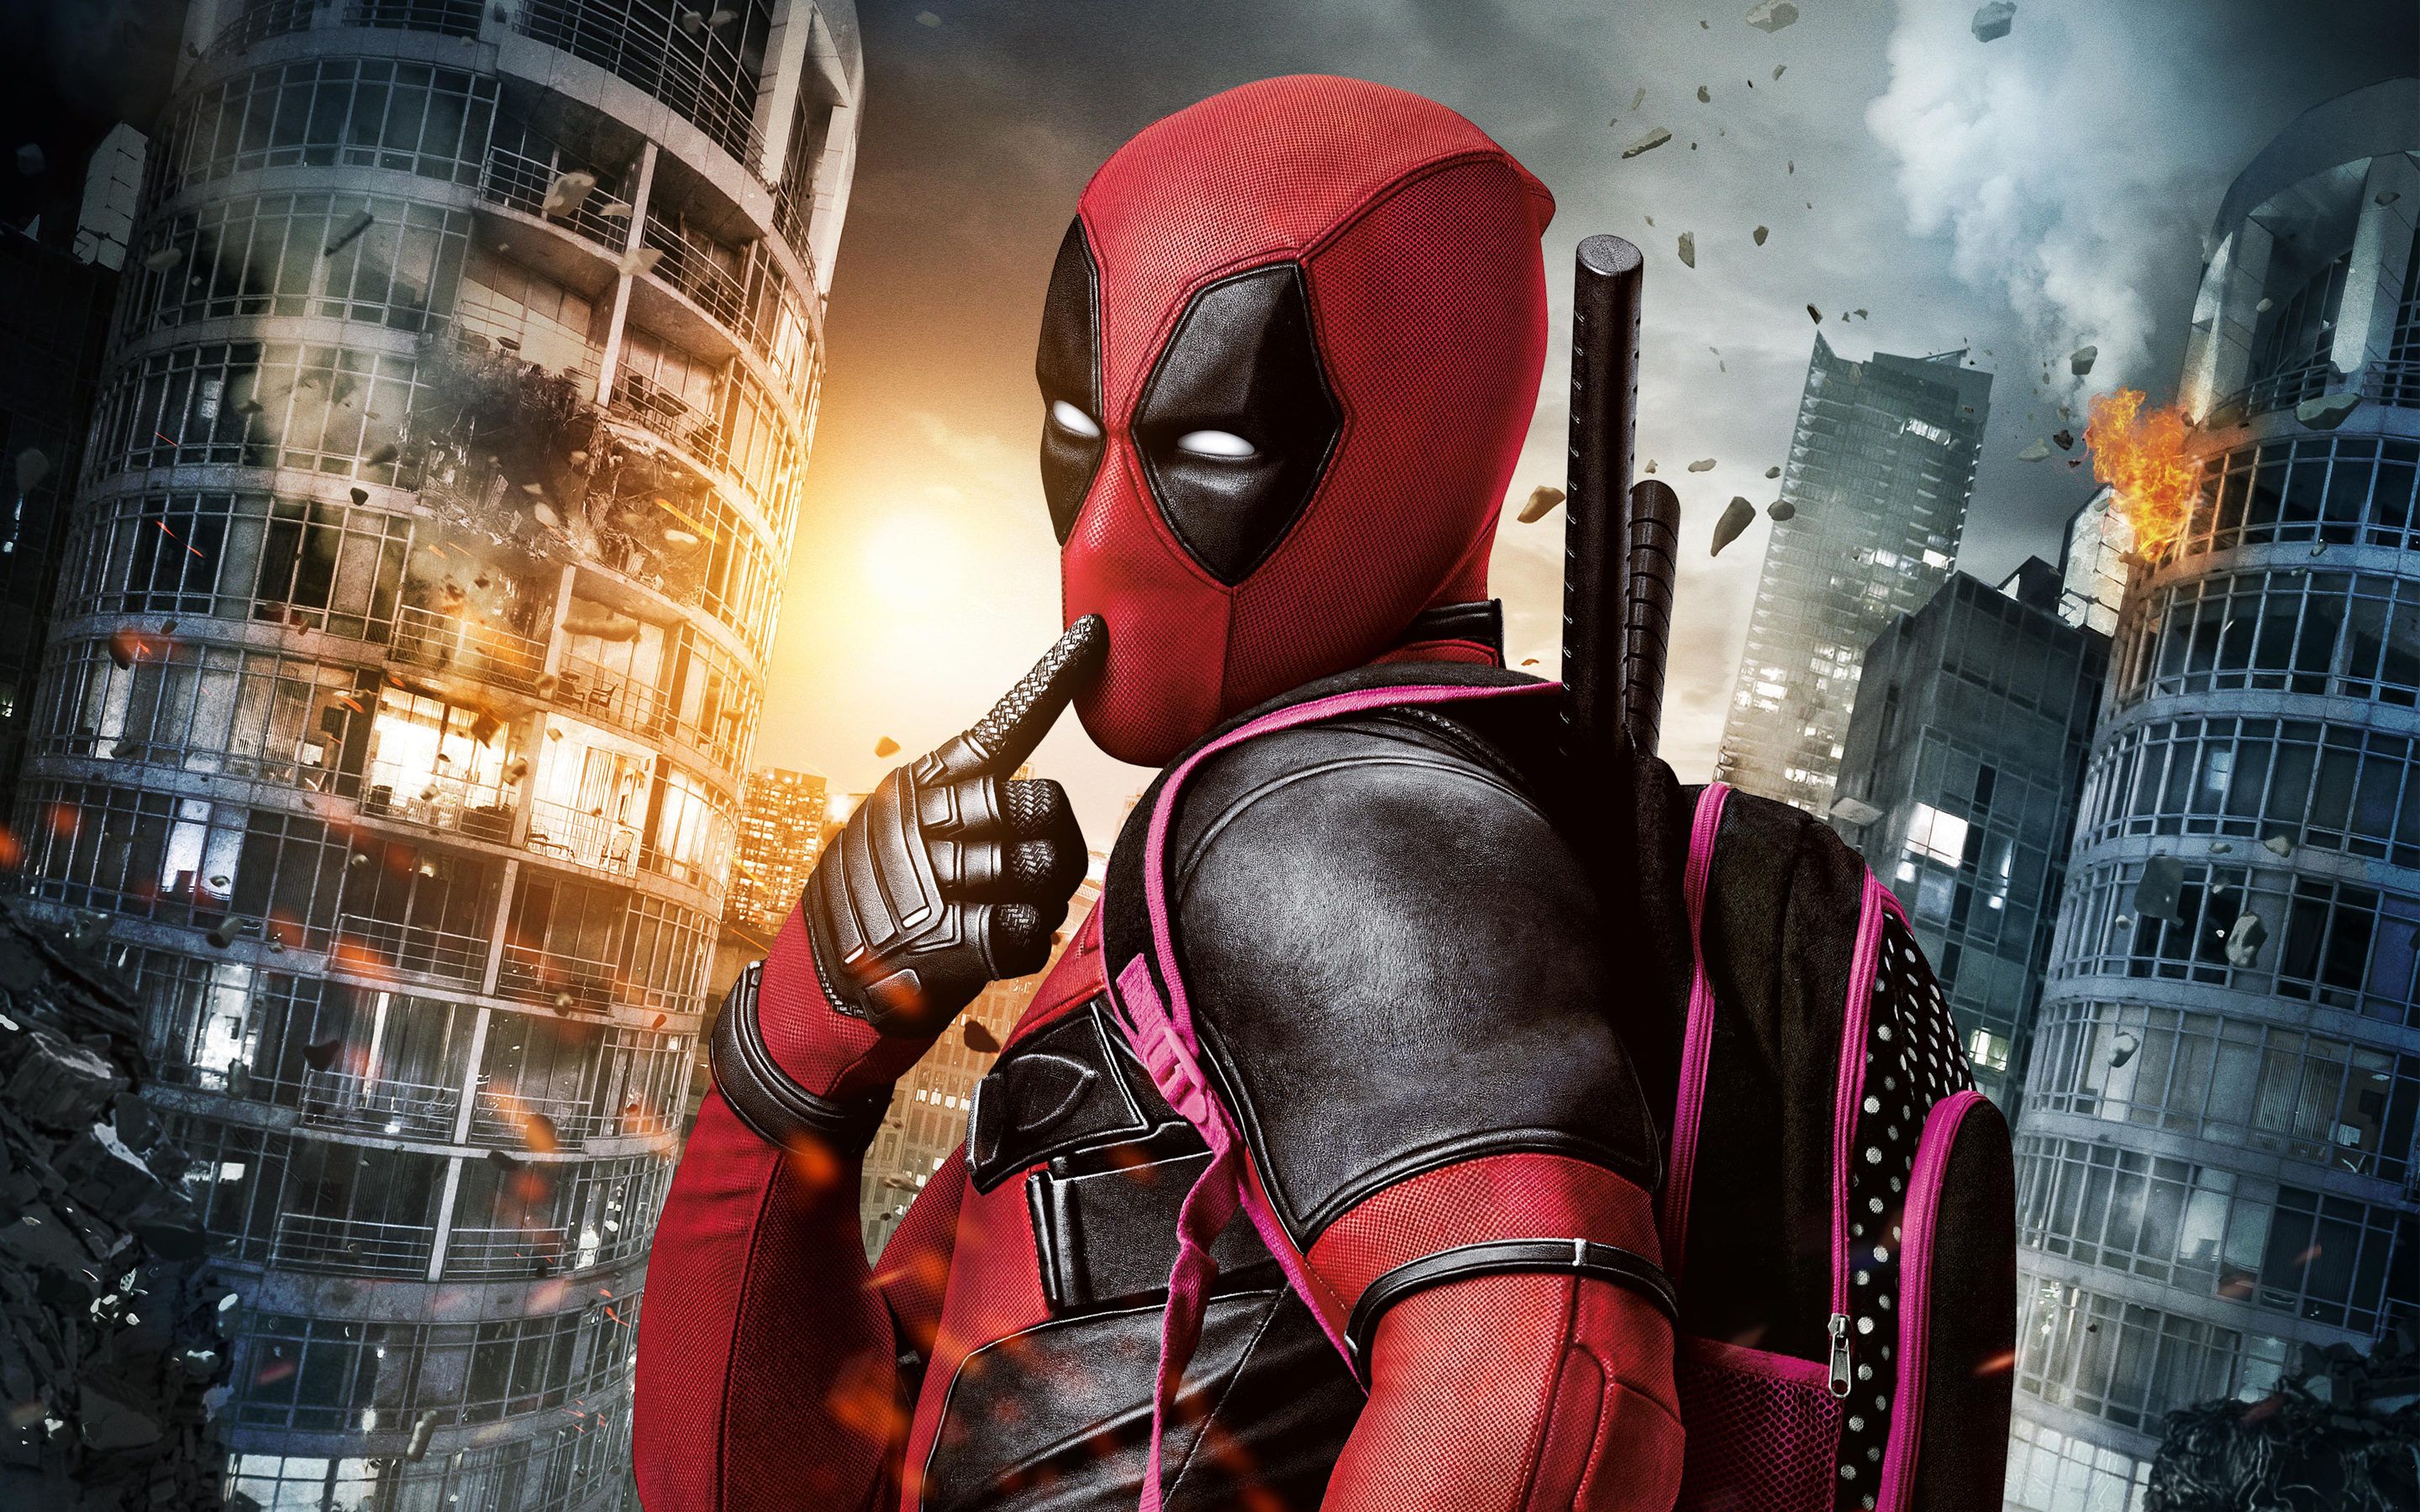 49+ Deadpool and Spider-Man Wallpapers: HD, 4K, 5K for PC and Mobile |  Download free images for iPhone, Android